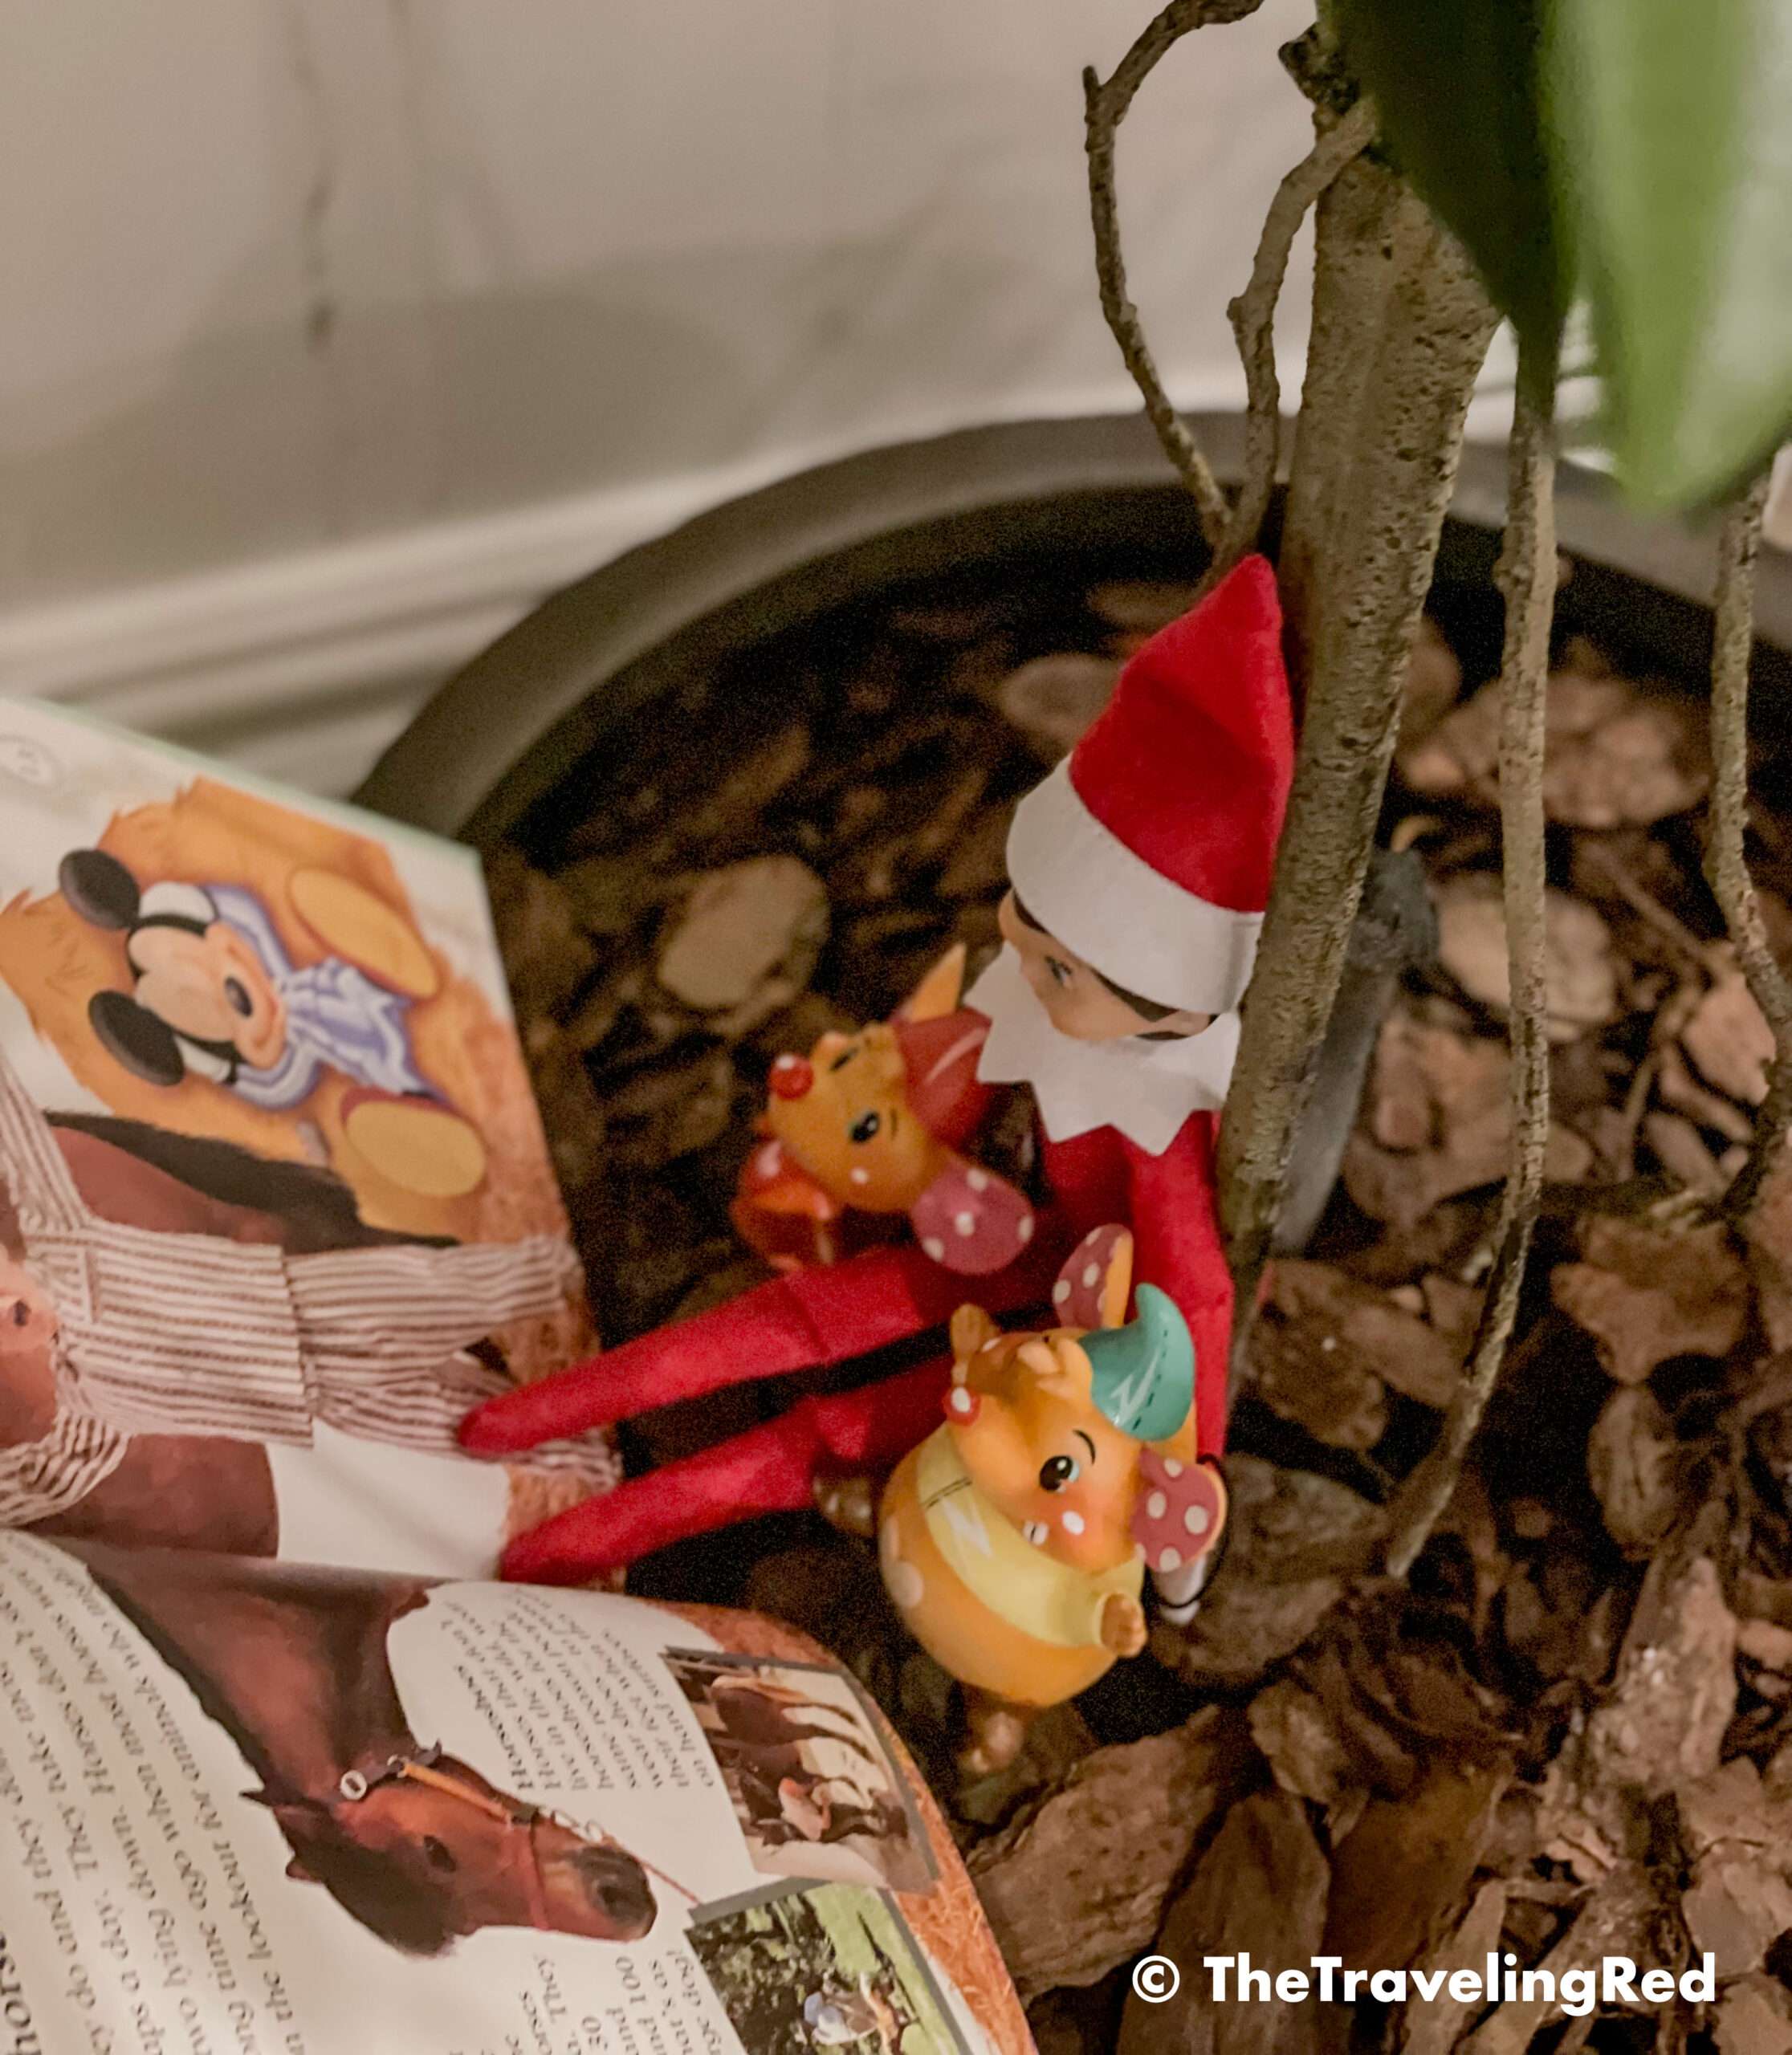 Naughty Elf on the shelf hid under a tree to read a book to some of the toys. Fun and easy elf on the shelf ideas for a naughty elf that are quick and easy using things you have at home.